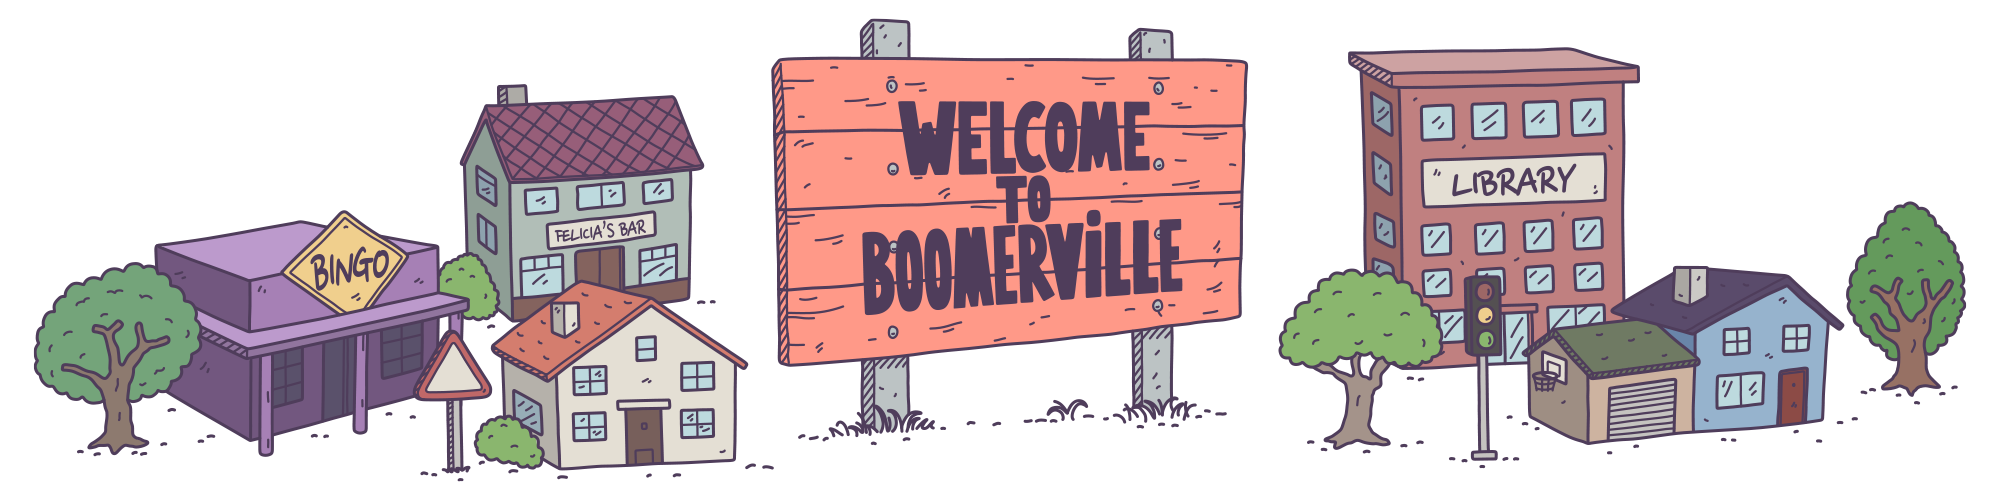 Welcome to Boomerville!